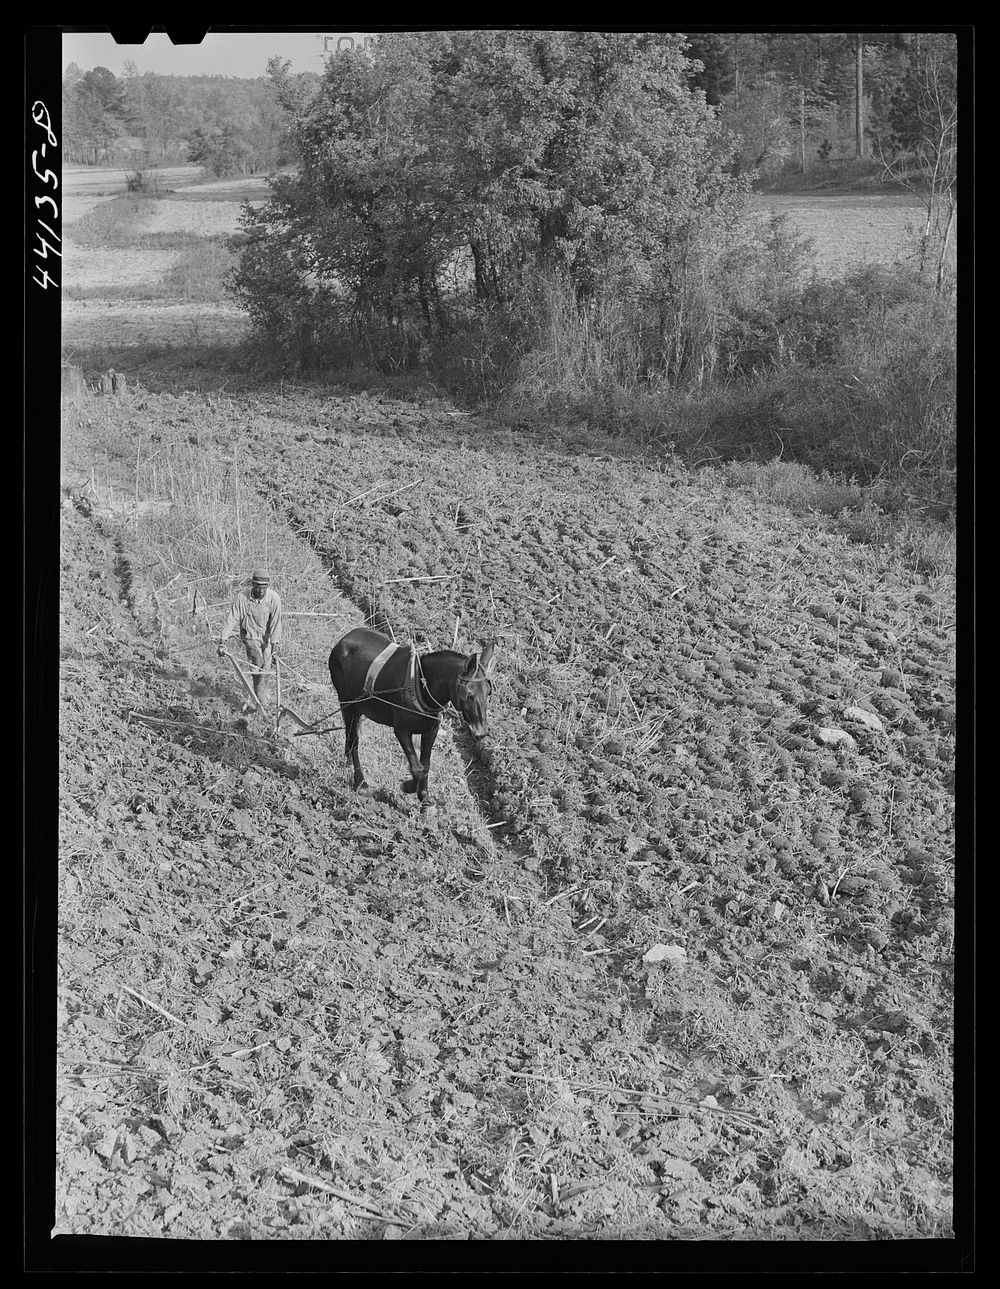 Plowing. Heard County, Georgia. Sourced from the Library of Congress.